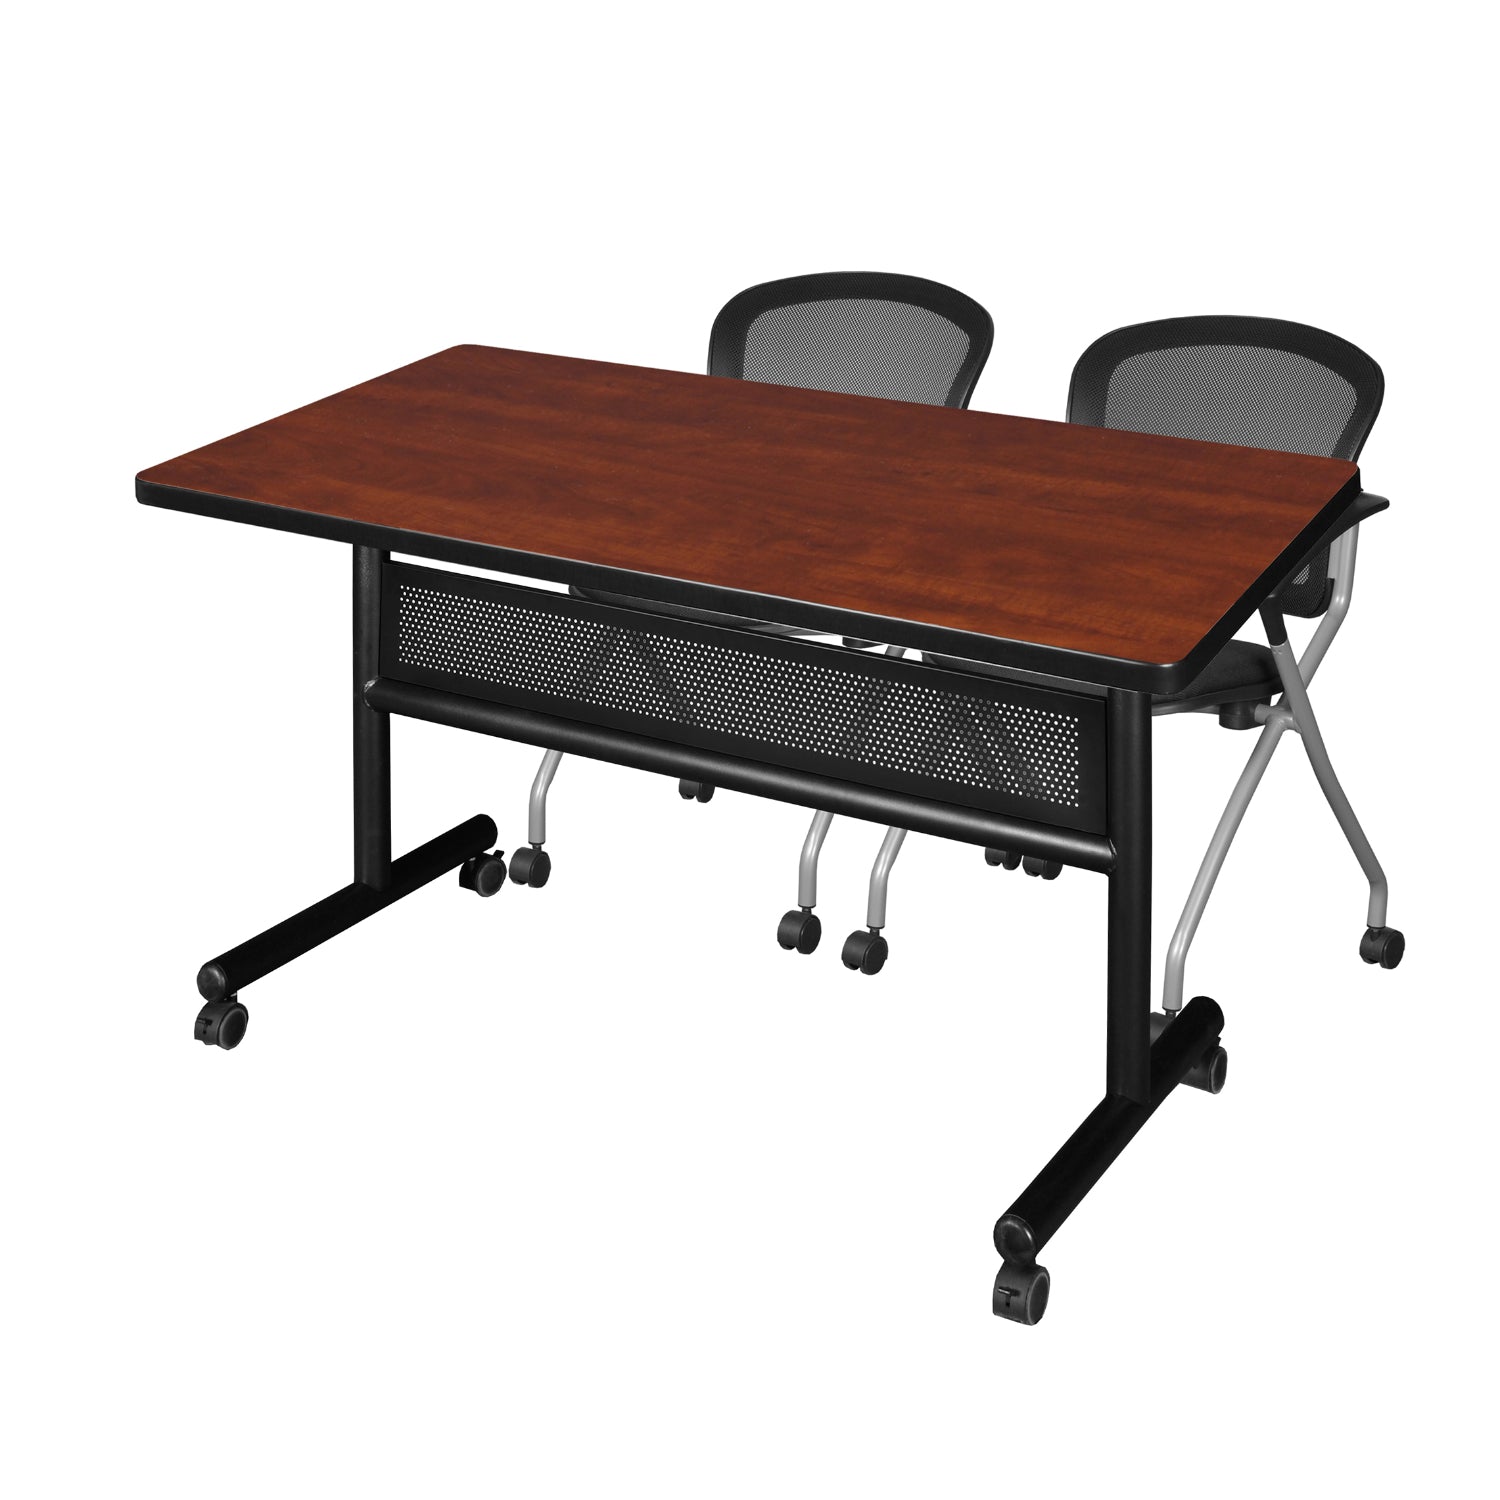 Kobe Flip Top Privacy Training Table and Chair Package, Kobe 48" x 30" Flip Top Mobile Nesting Table with Modesty Panel and 2 Cadence Nesting Chairs